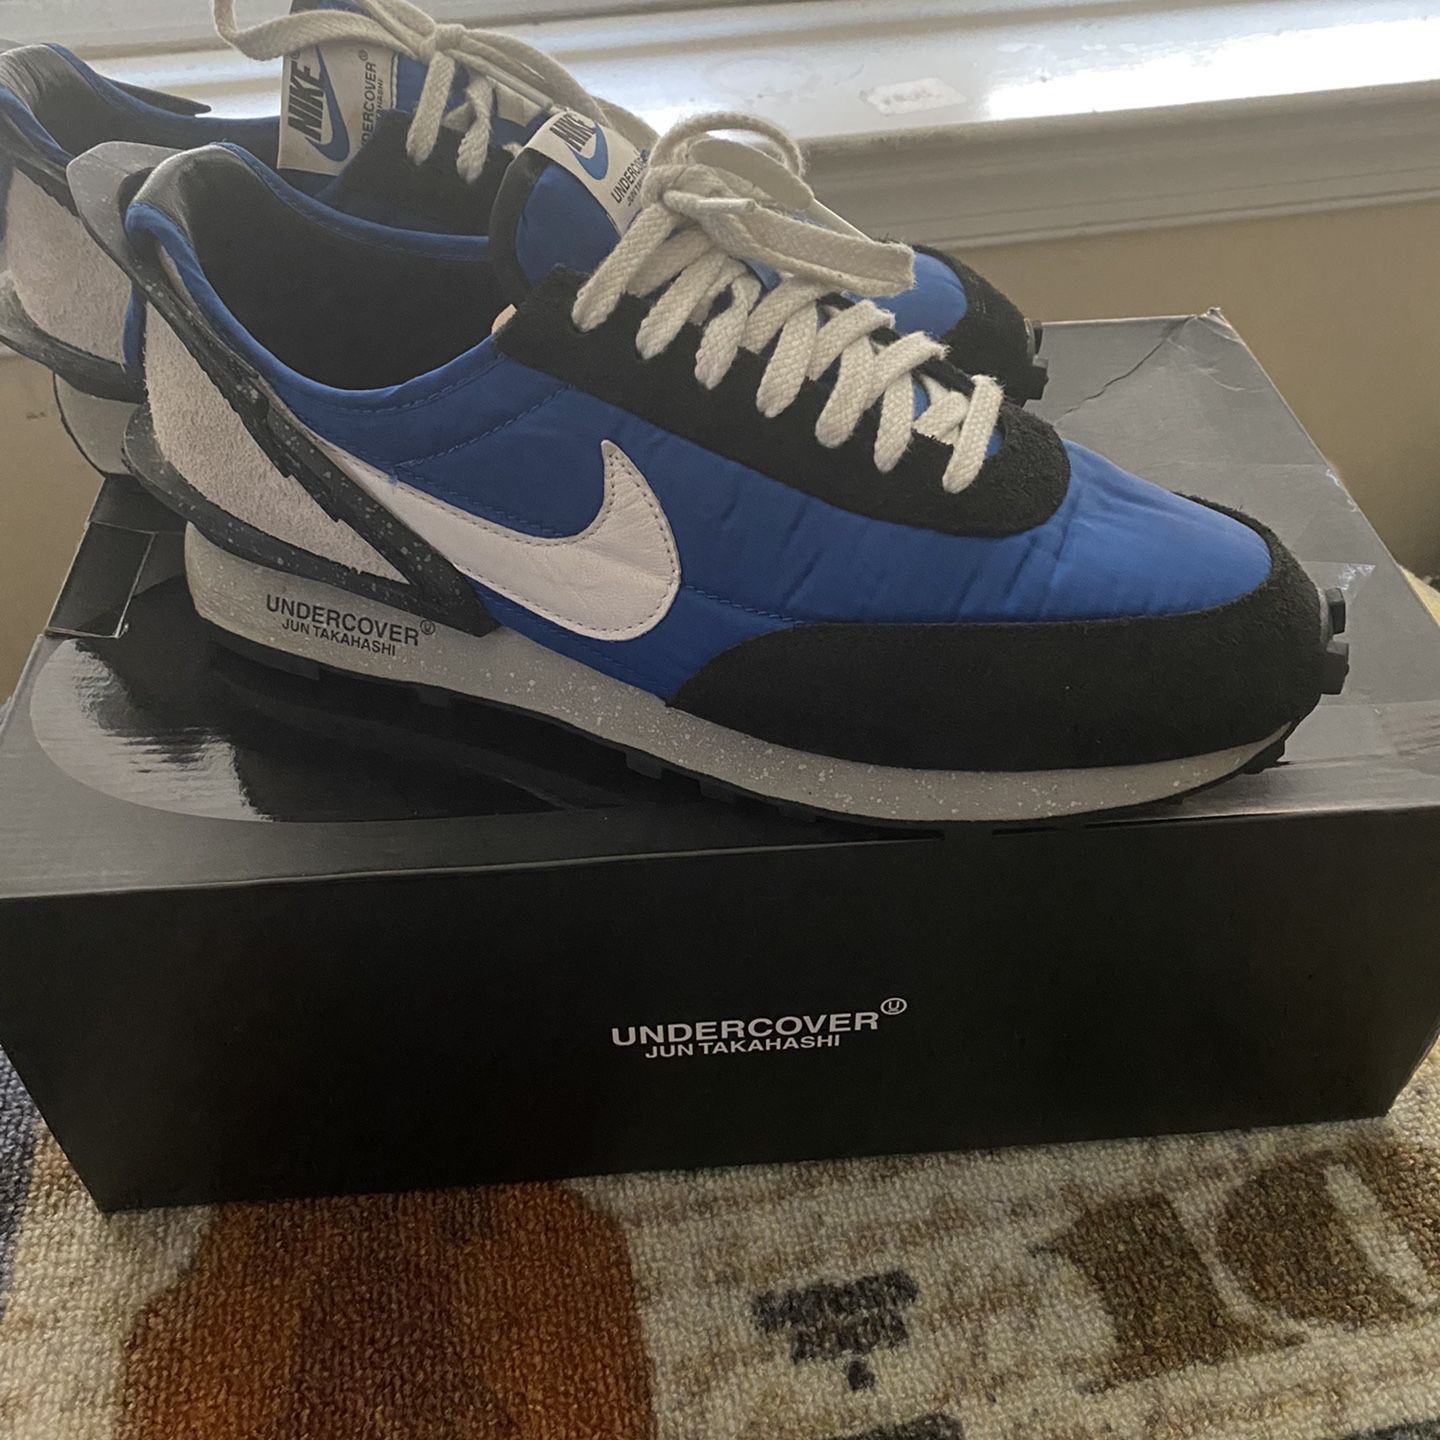 Nike undercover Size 12